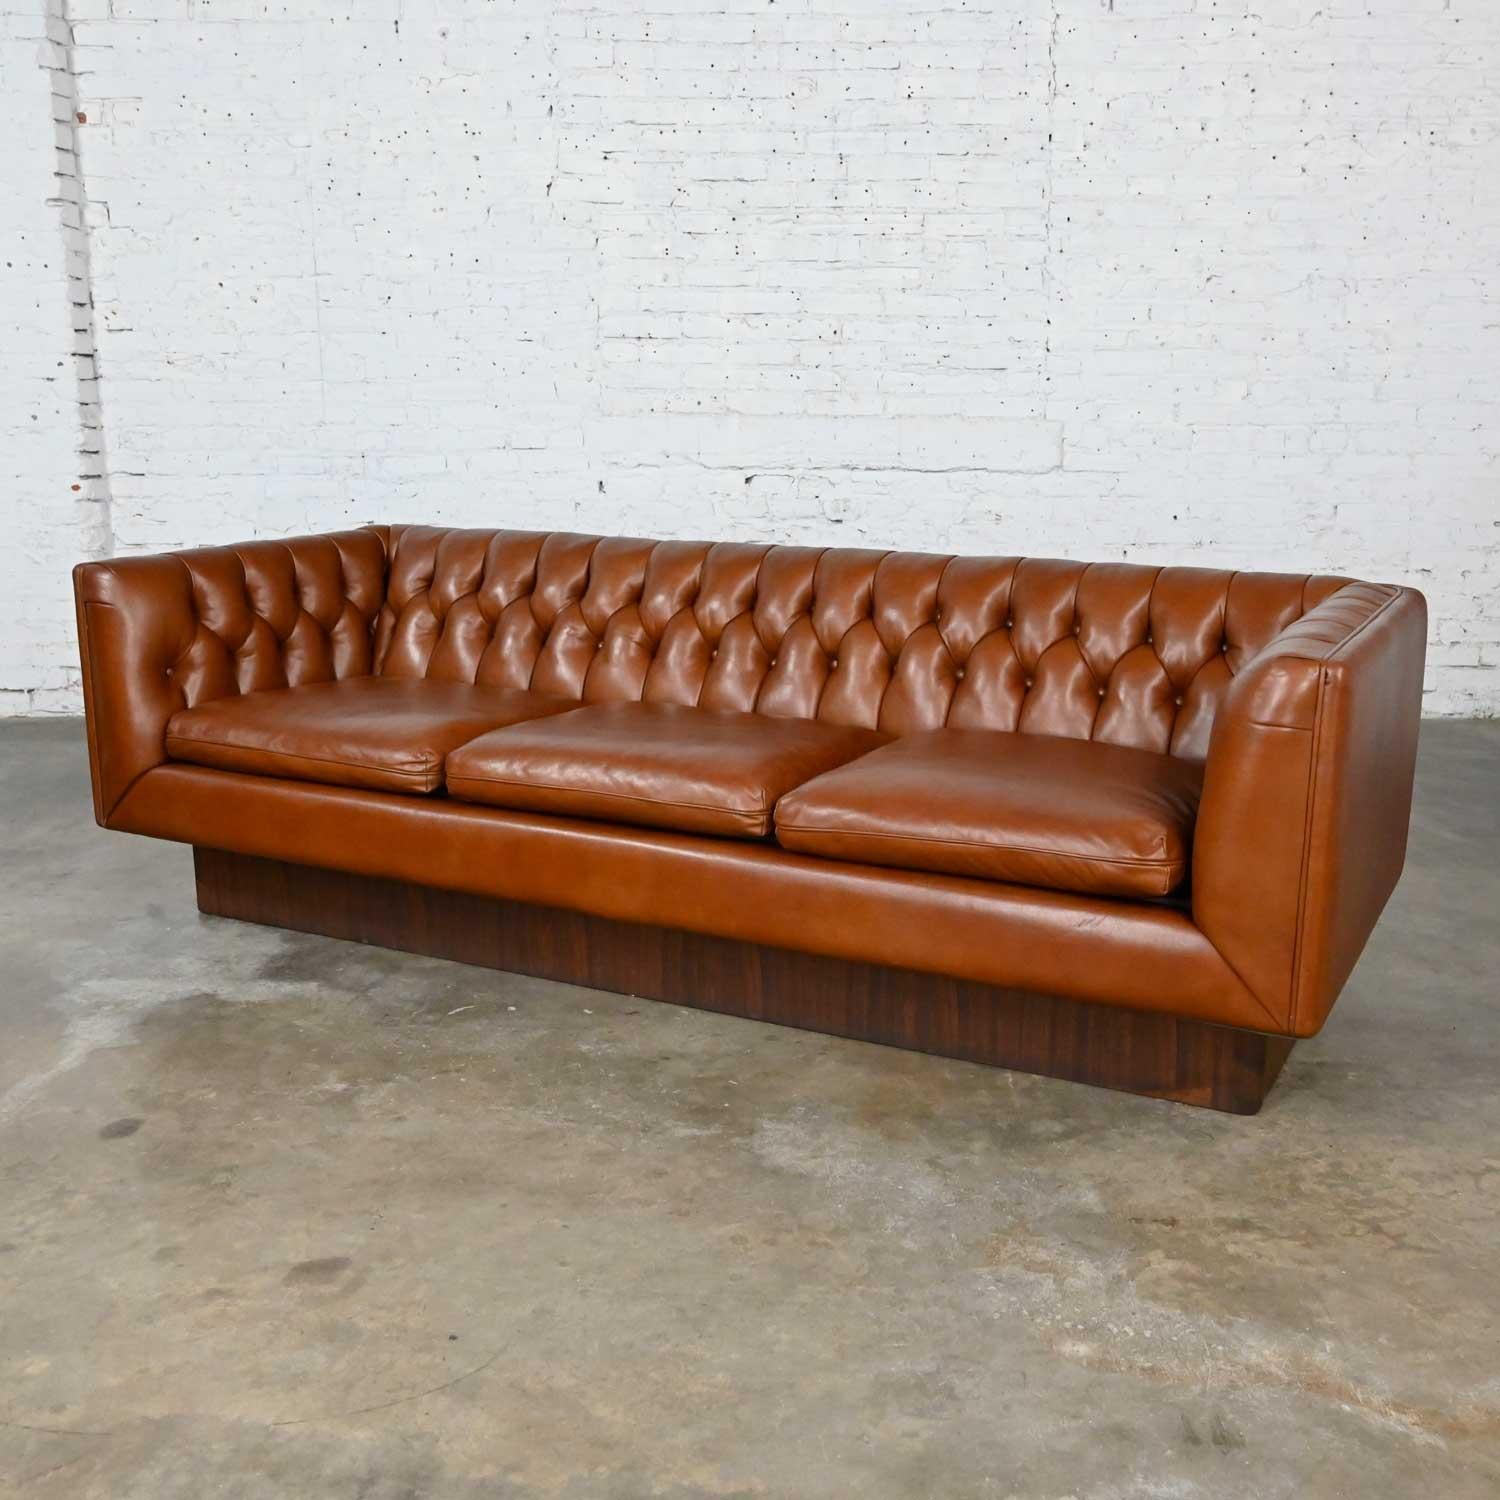 20th Century Stow & Davis Cognac Leather Modern Tuxedo Chesterfield Style Tufted Sofa For Sale